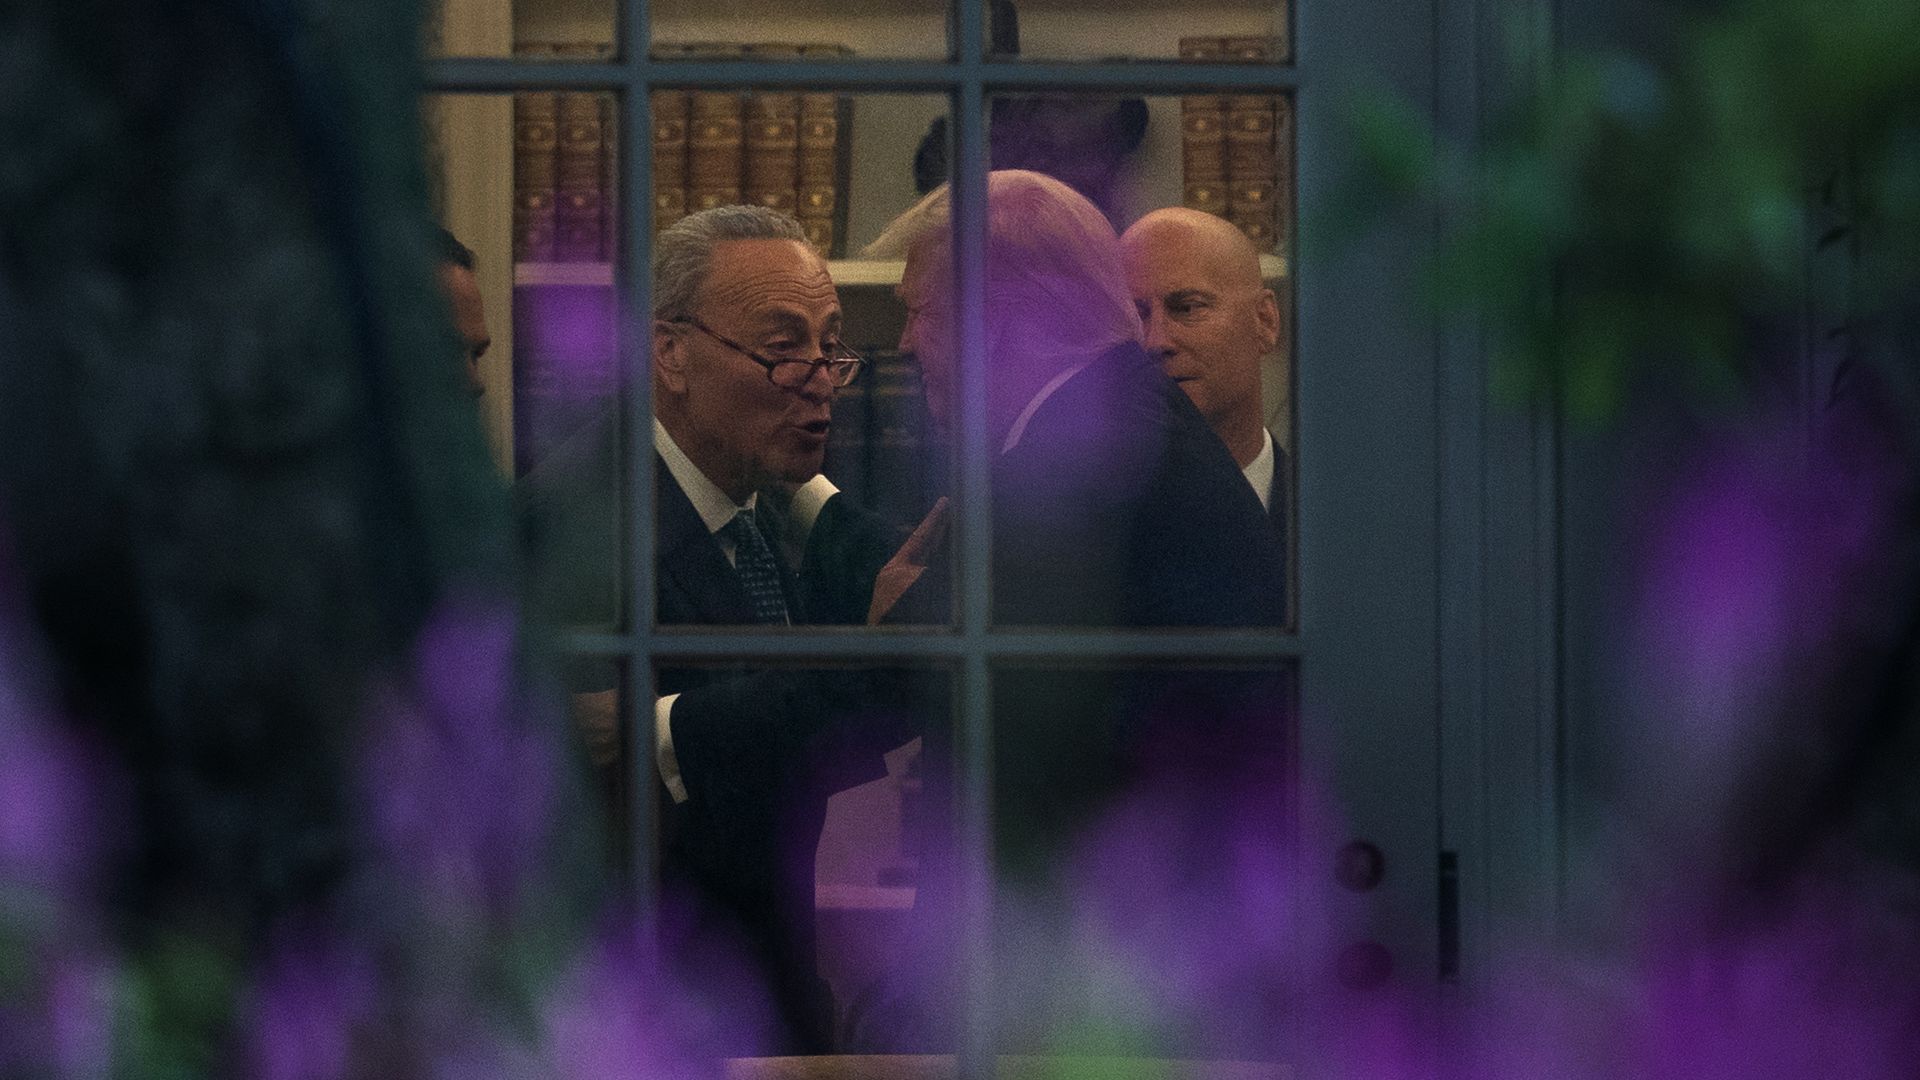 Schumer and Trump through the Oval Office window